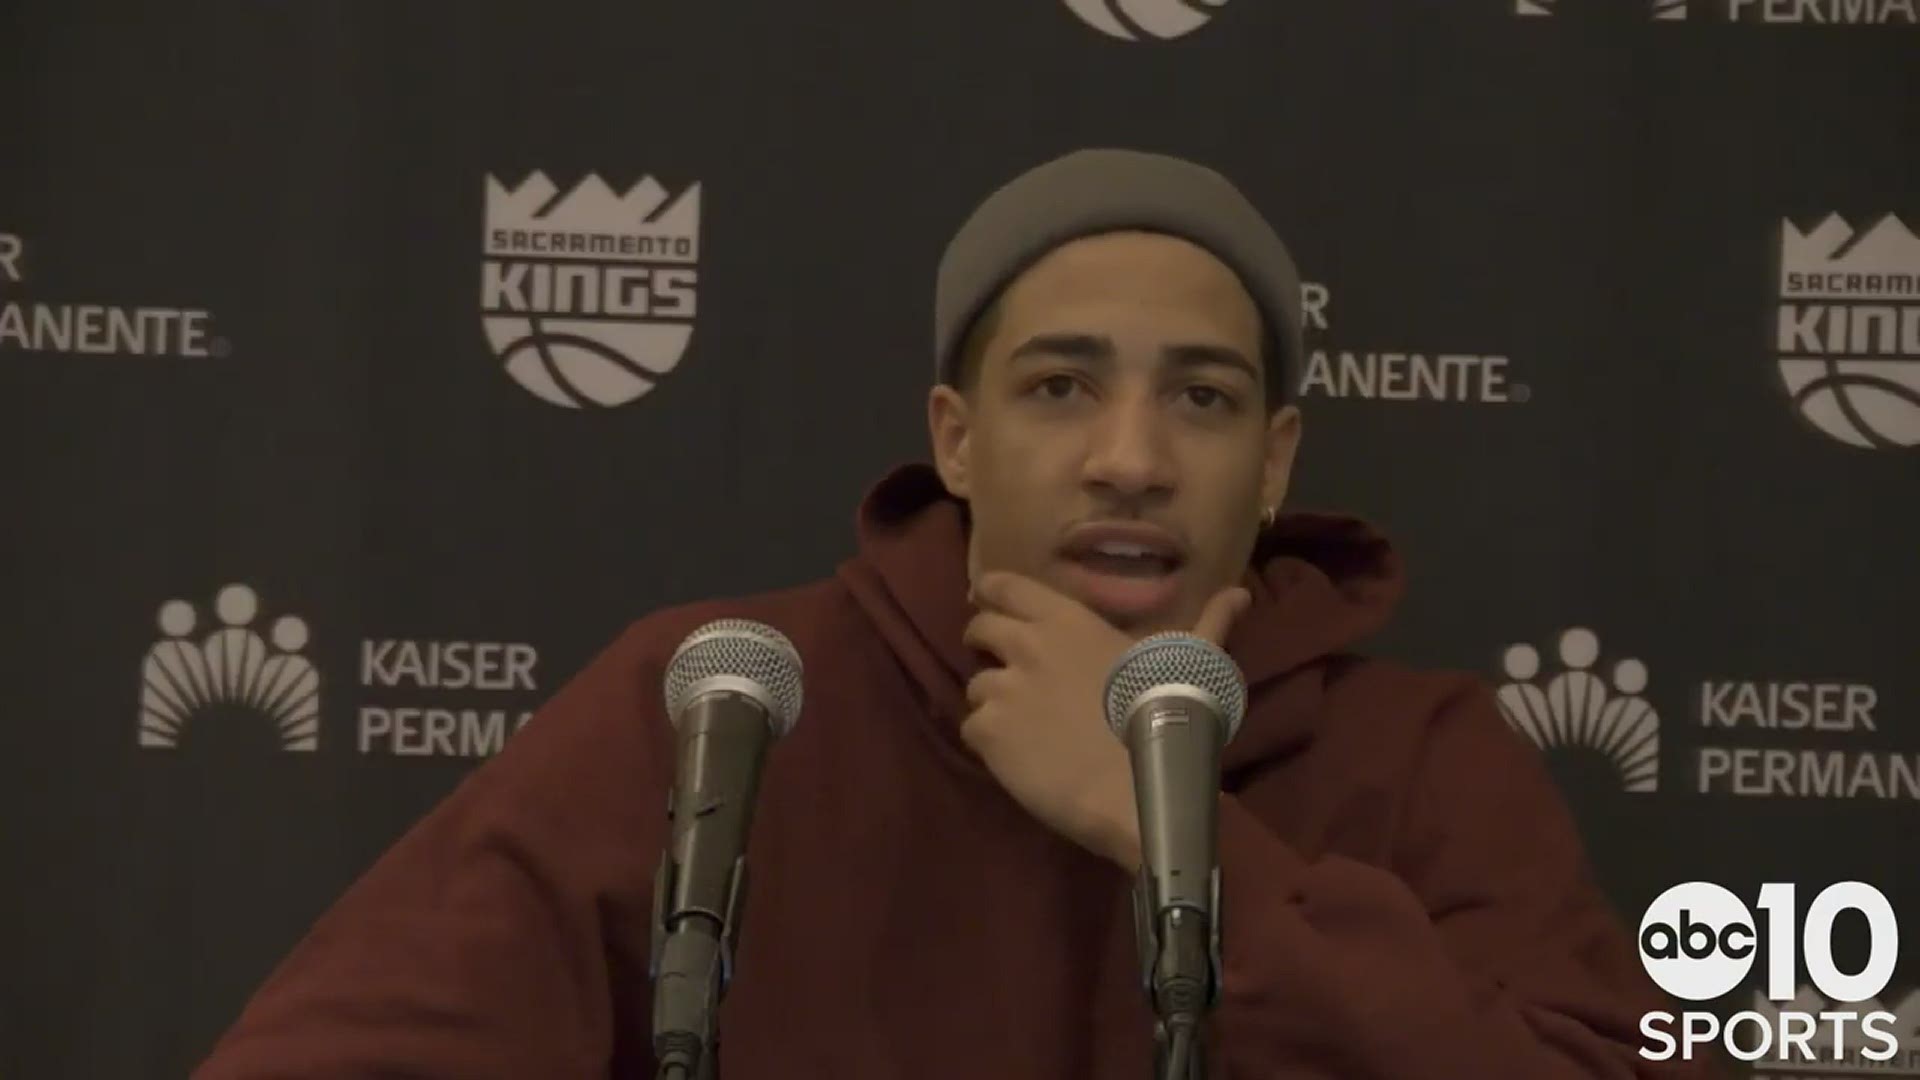 Sacramento Kings rookie guard Tyrese Haliburton talks about Wednesday's 121-119 win in Washington DC over the Wizards and being inserted into the starting lineup.